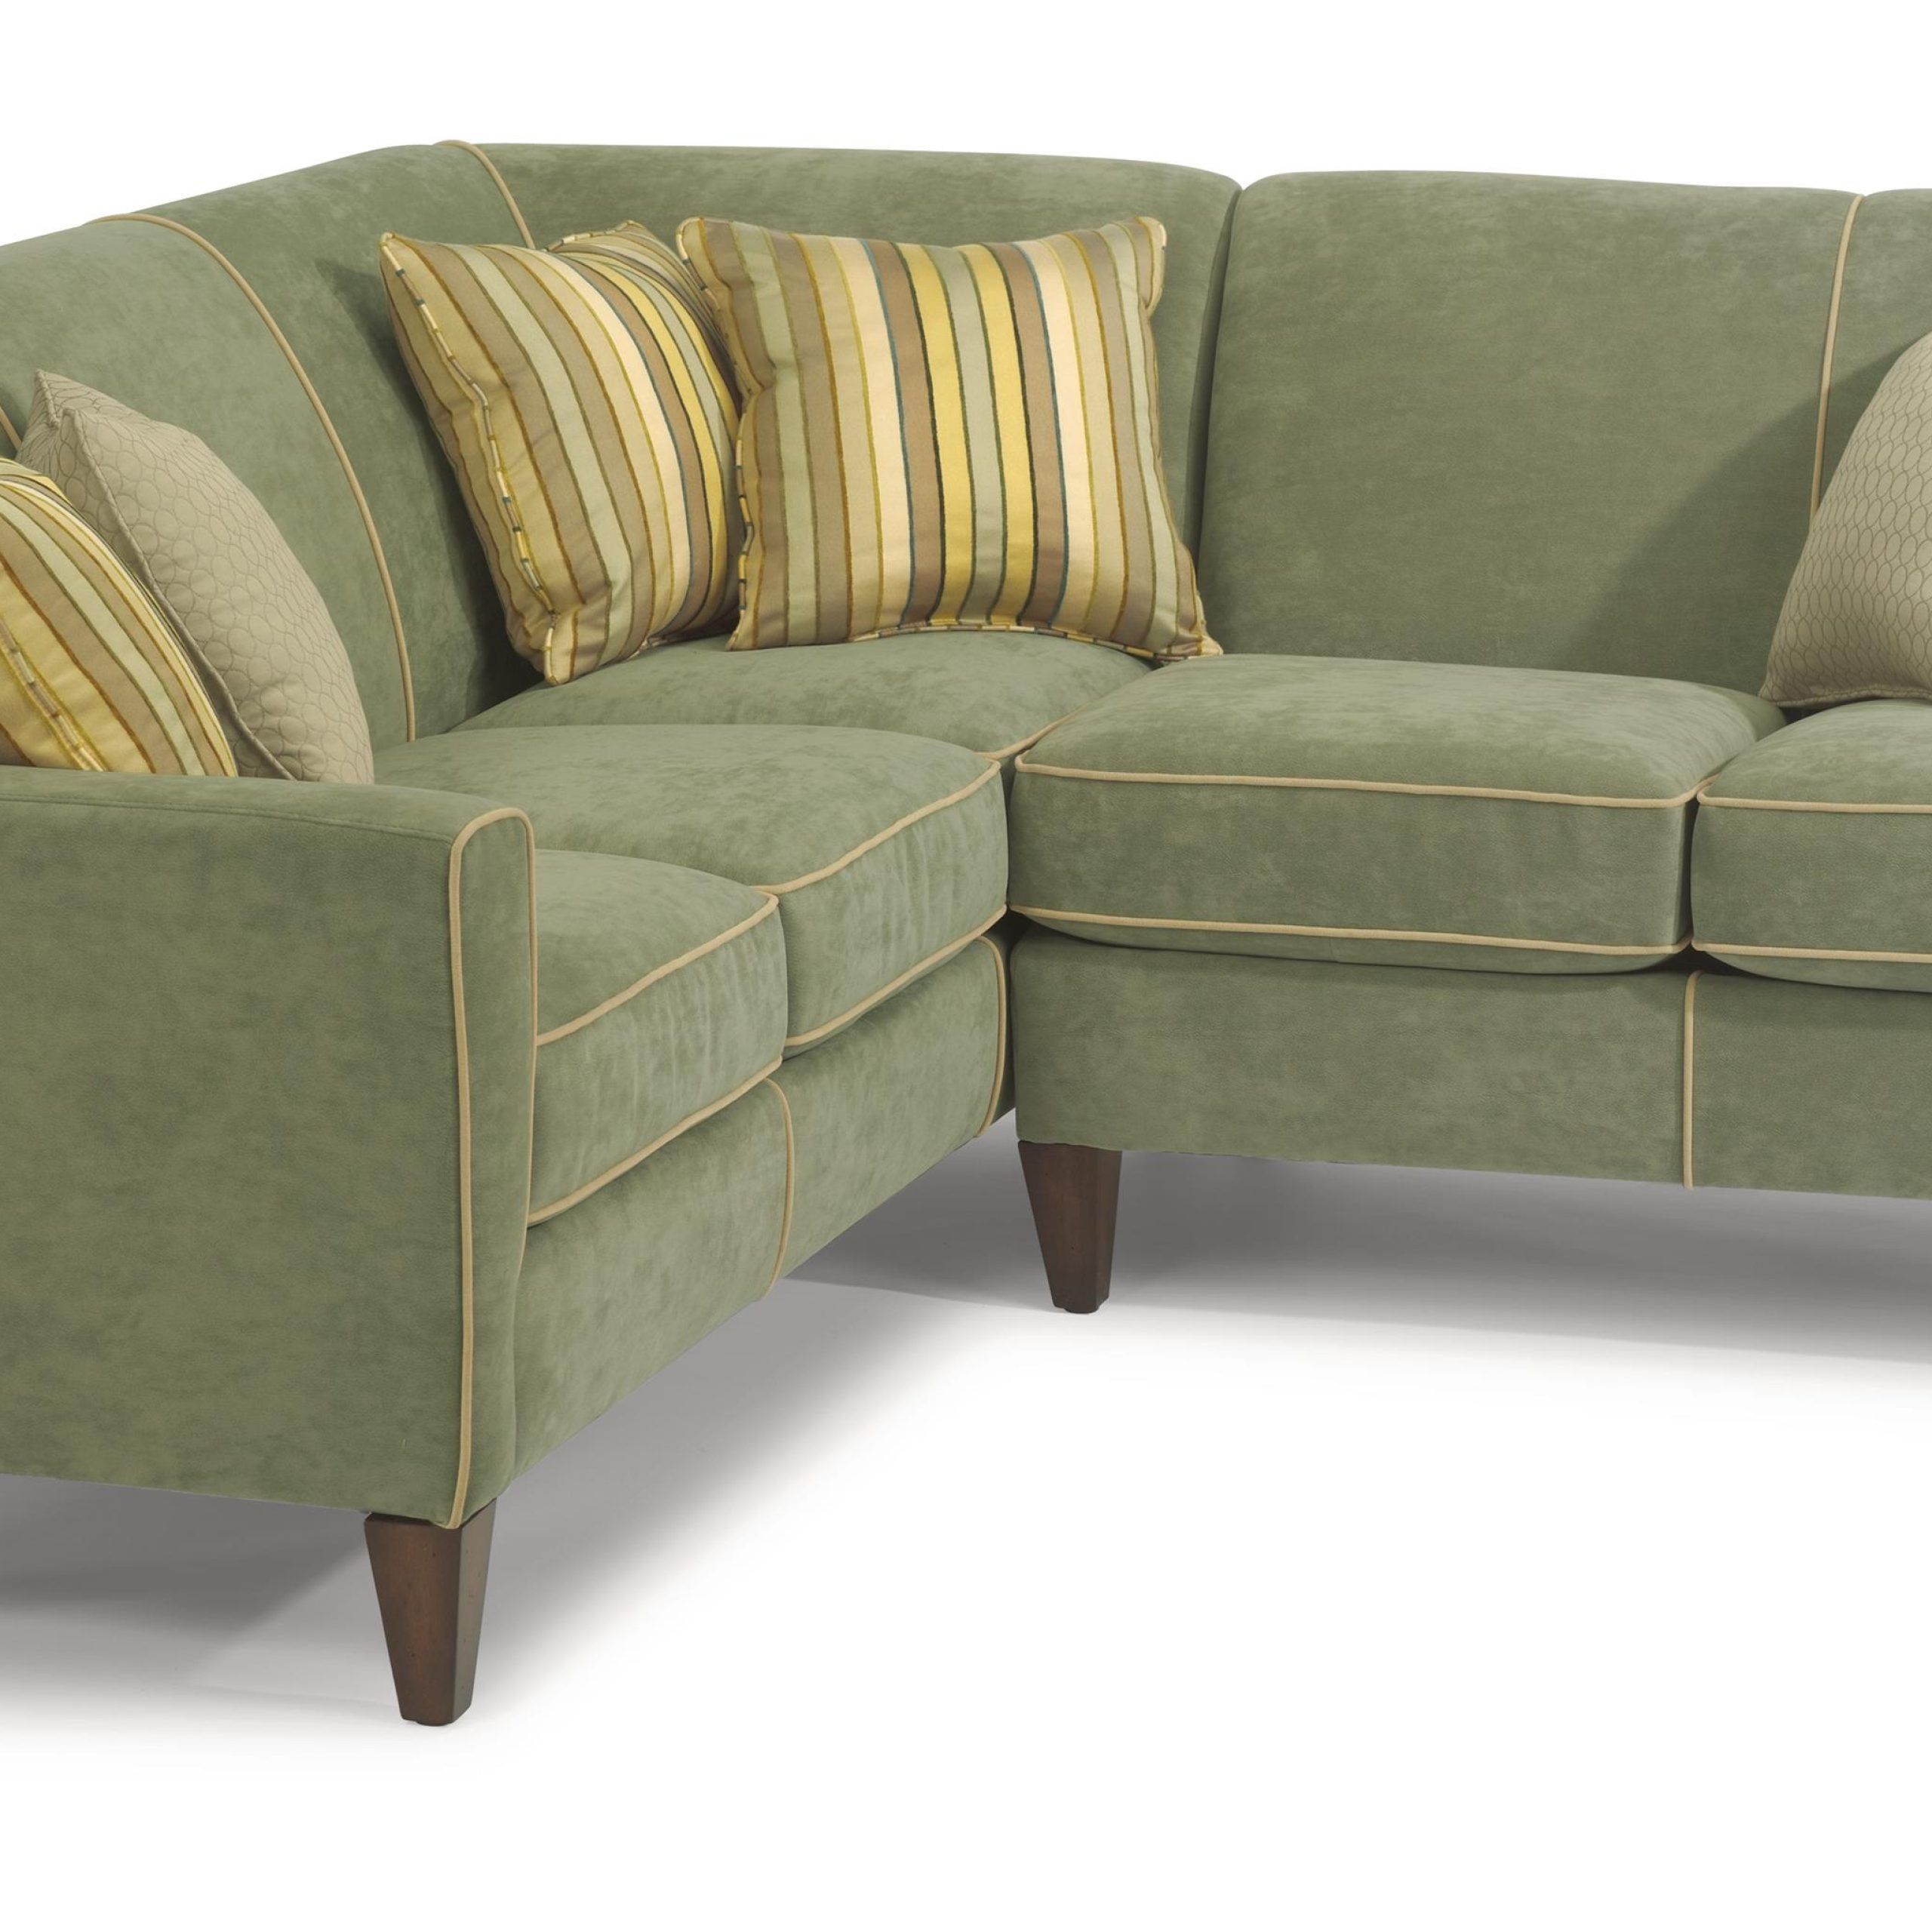 Flexsteel Digby 3966 28x1+3966 33x1 430 24 Contemporary L Shape With Regard To Modern L Shaped Sofa Sectionals (Gallery 5 of 20)